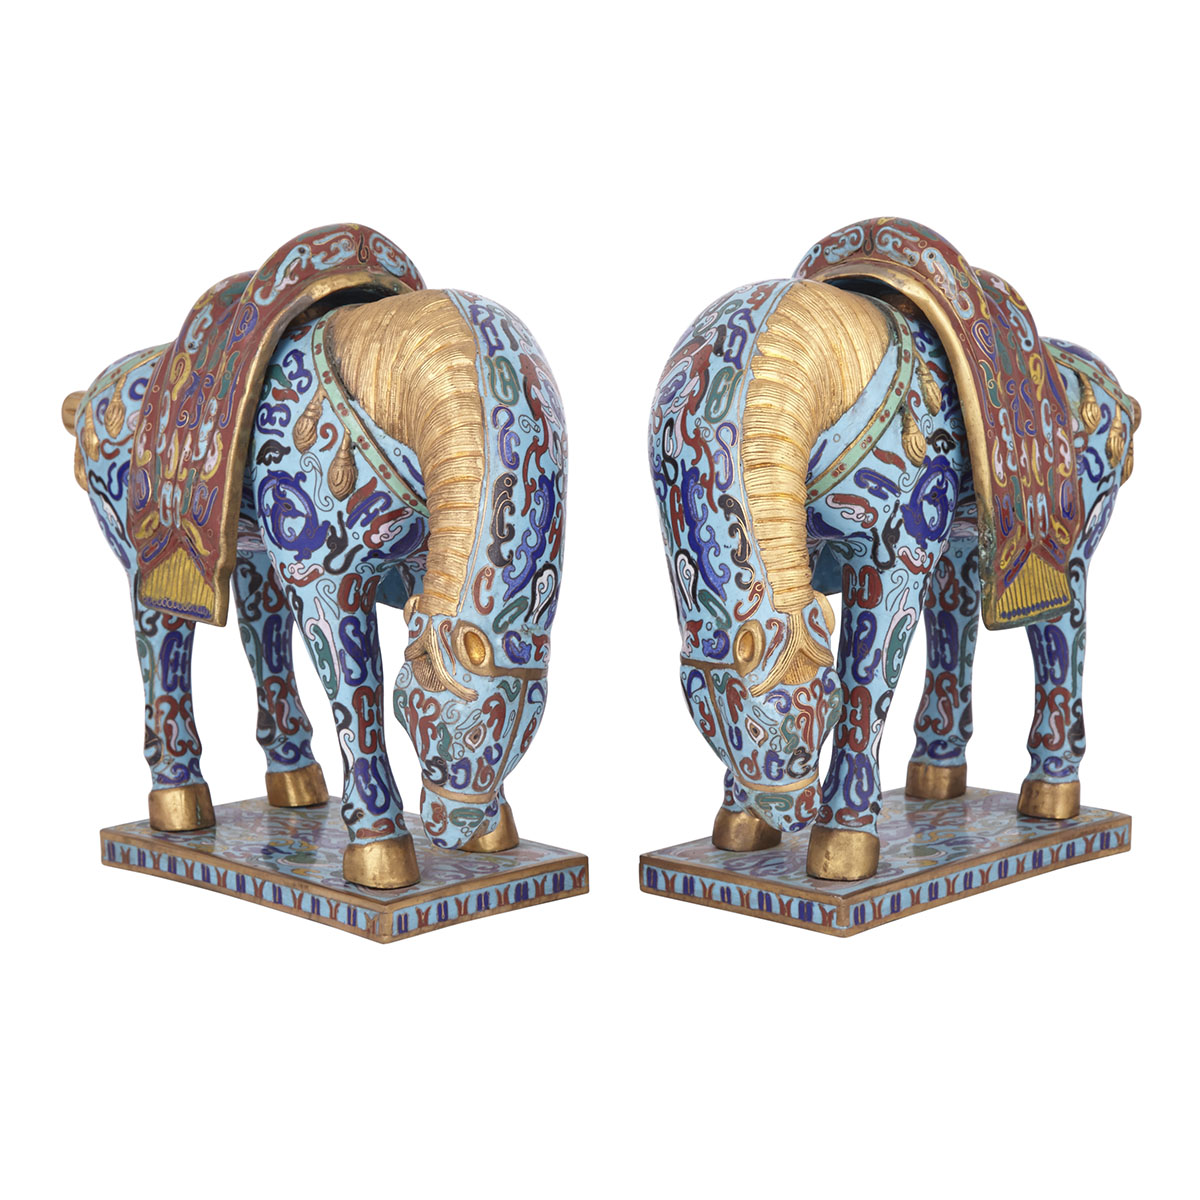 A Pair of Cloisonné Horses, First Half of 20th Century